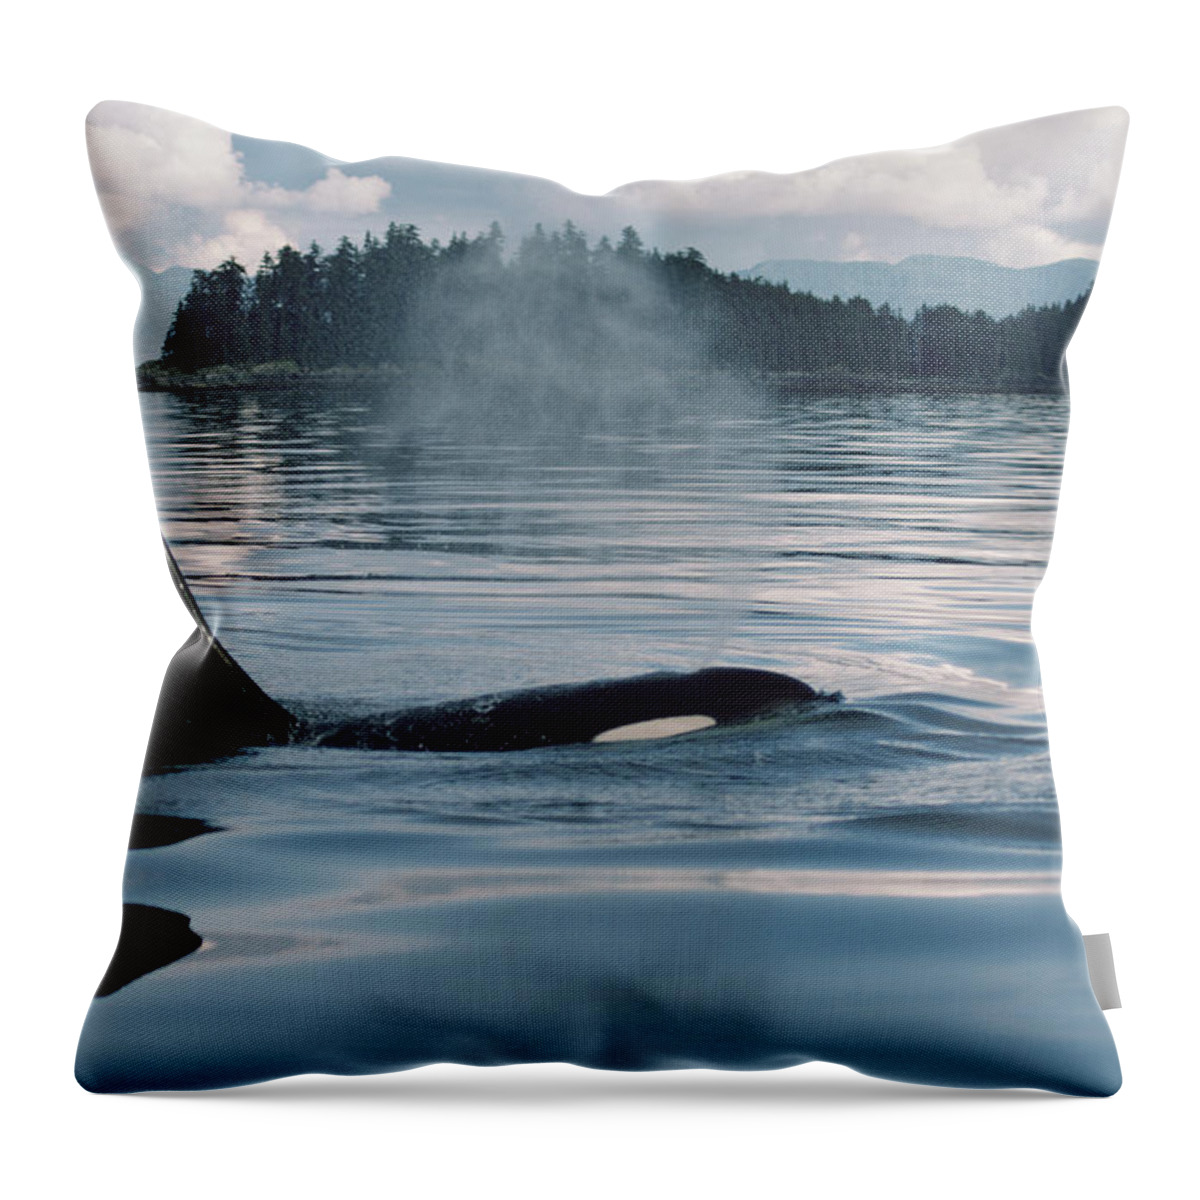 Feb0514 Throw Pillow featuring the photograph Orca Surfacing Johnstone Strait Bc #1 by Flip Nicklin